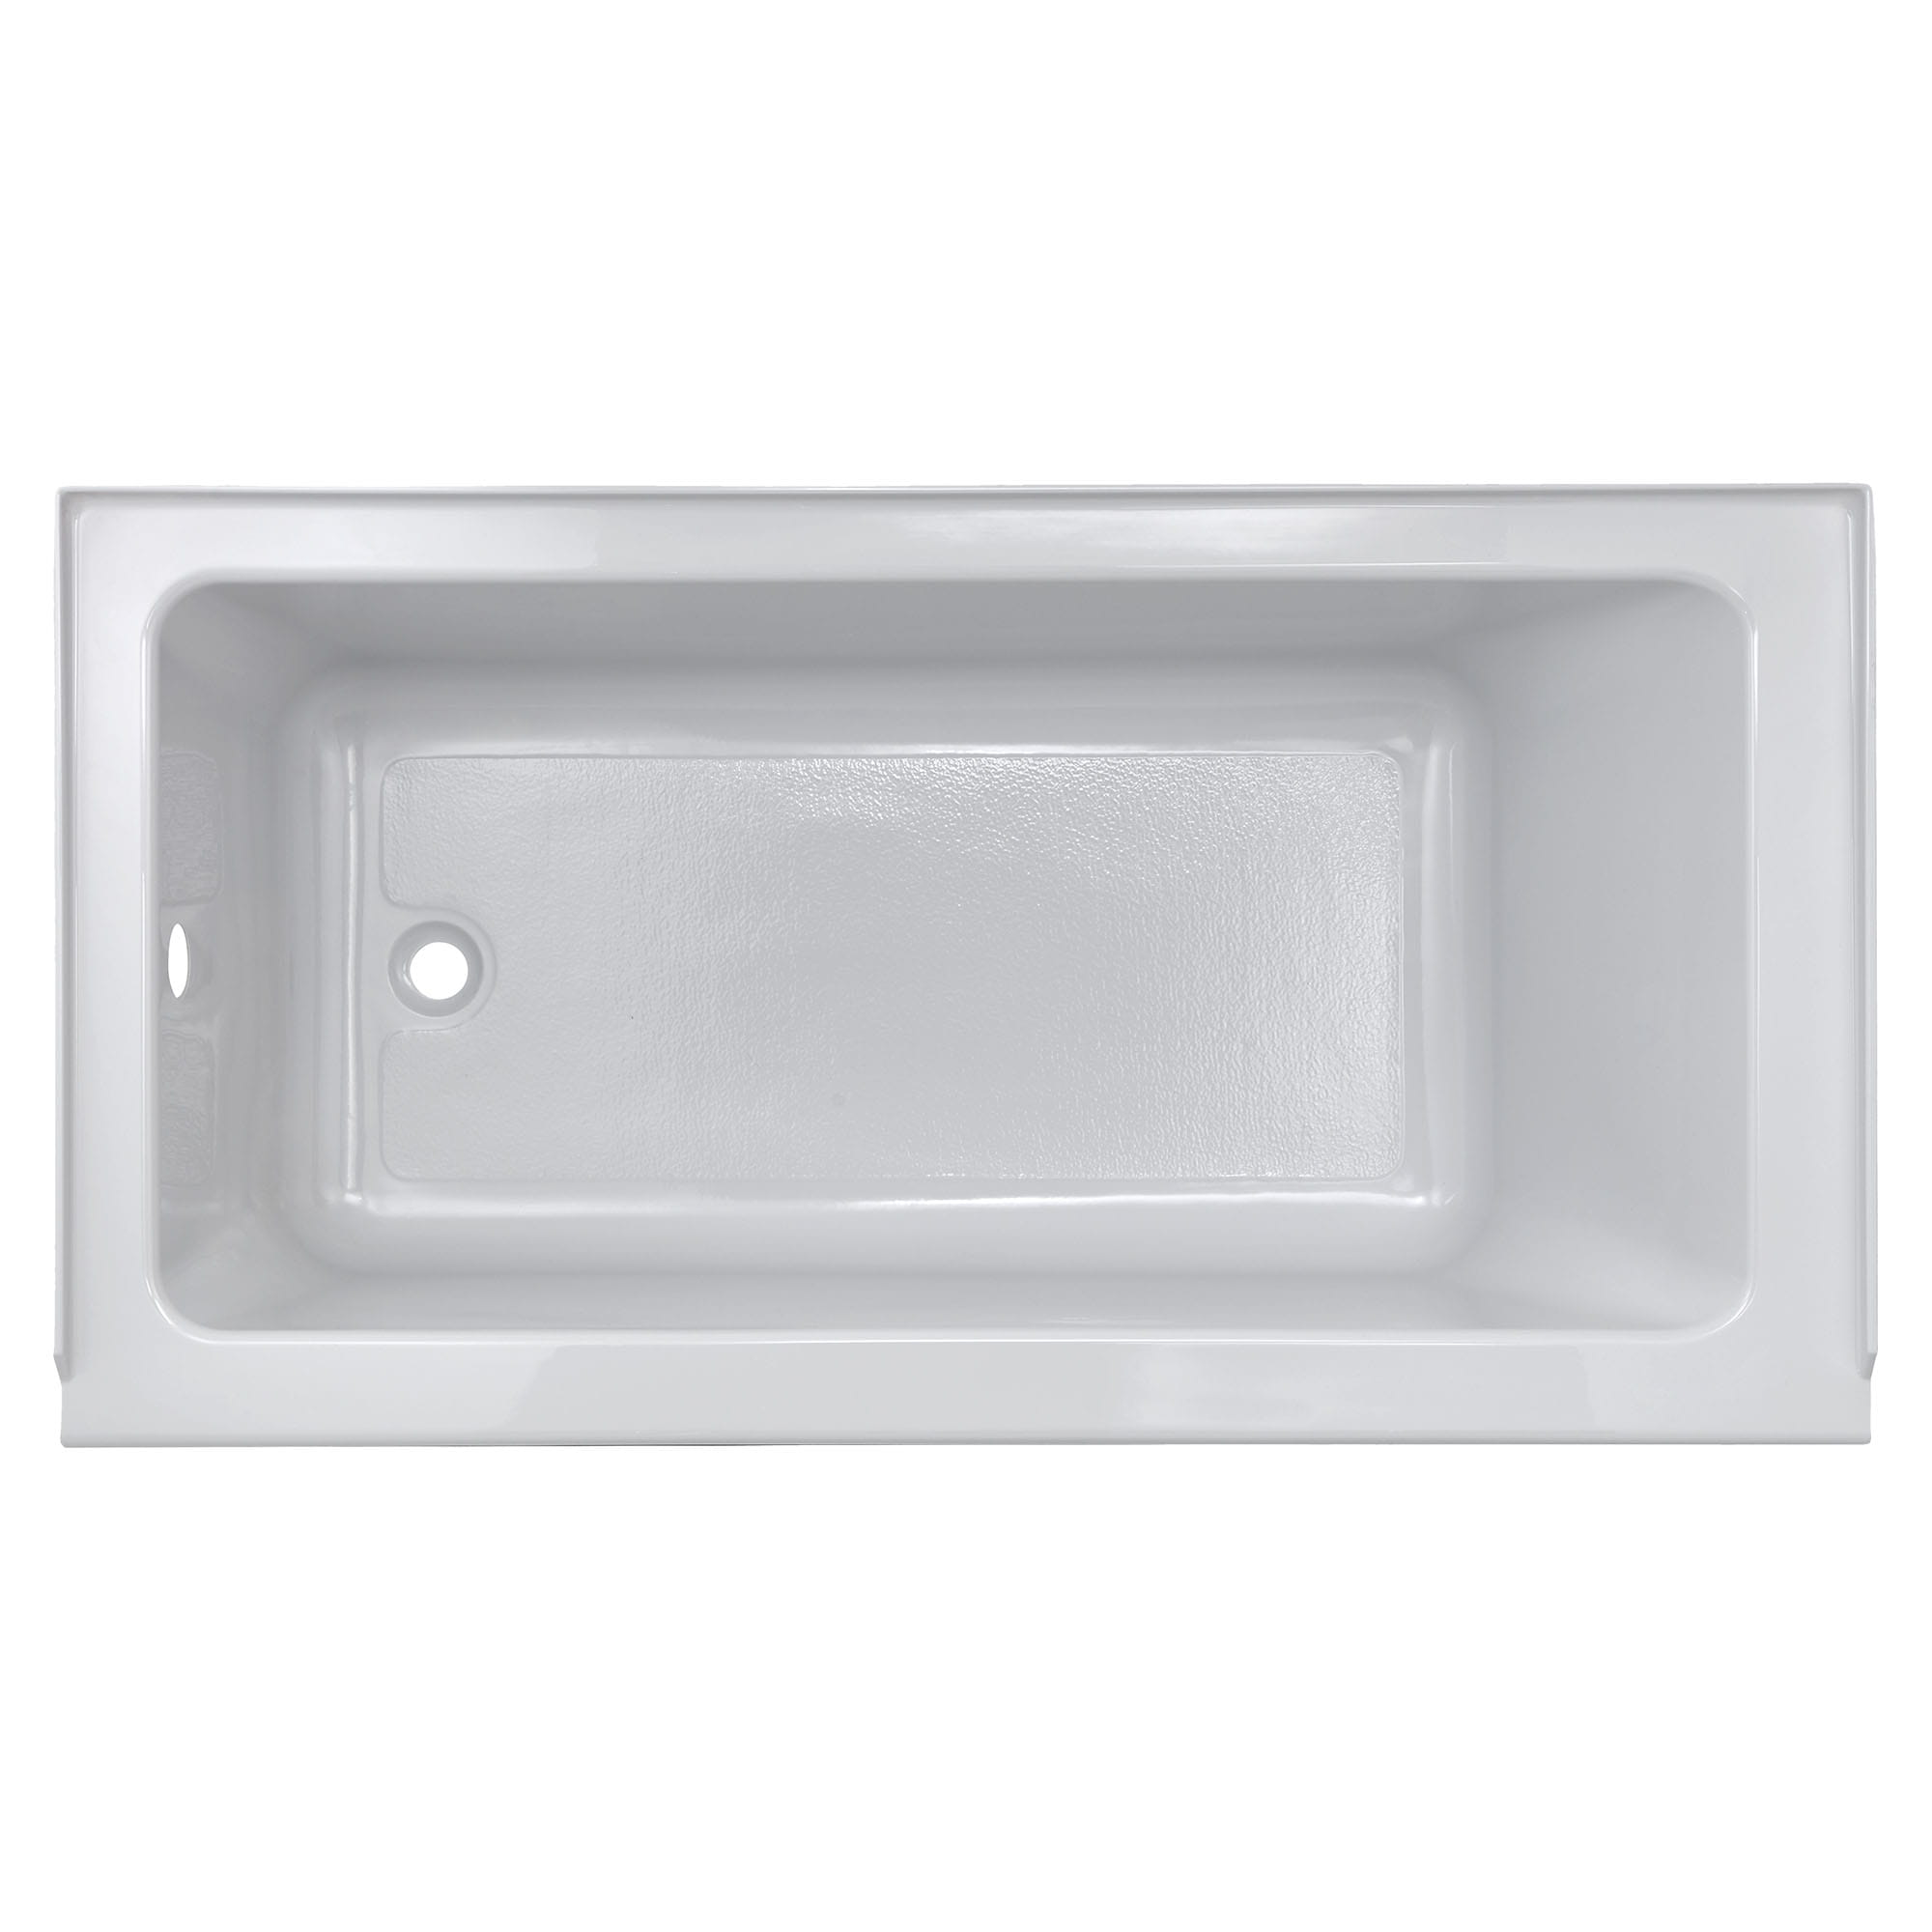 Studio® 60 x 30-Inch Integral Apron Bathtub With Left-Hand Outlet